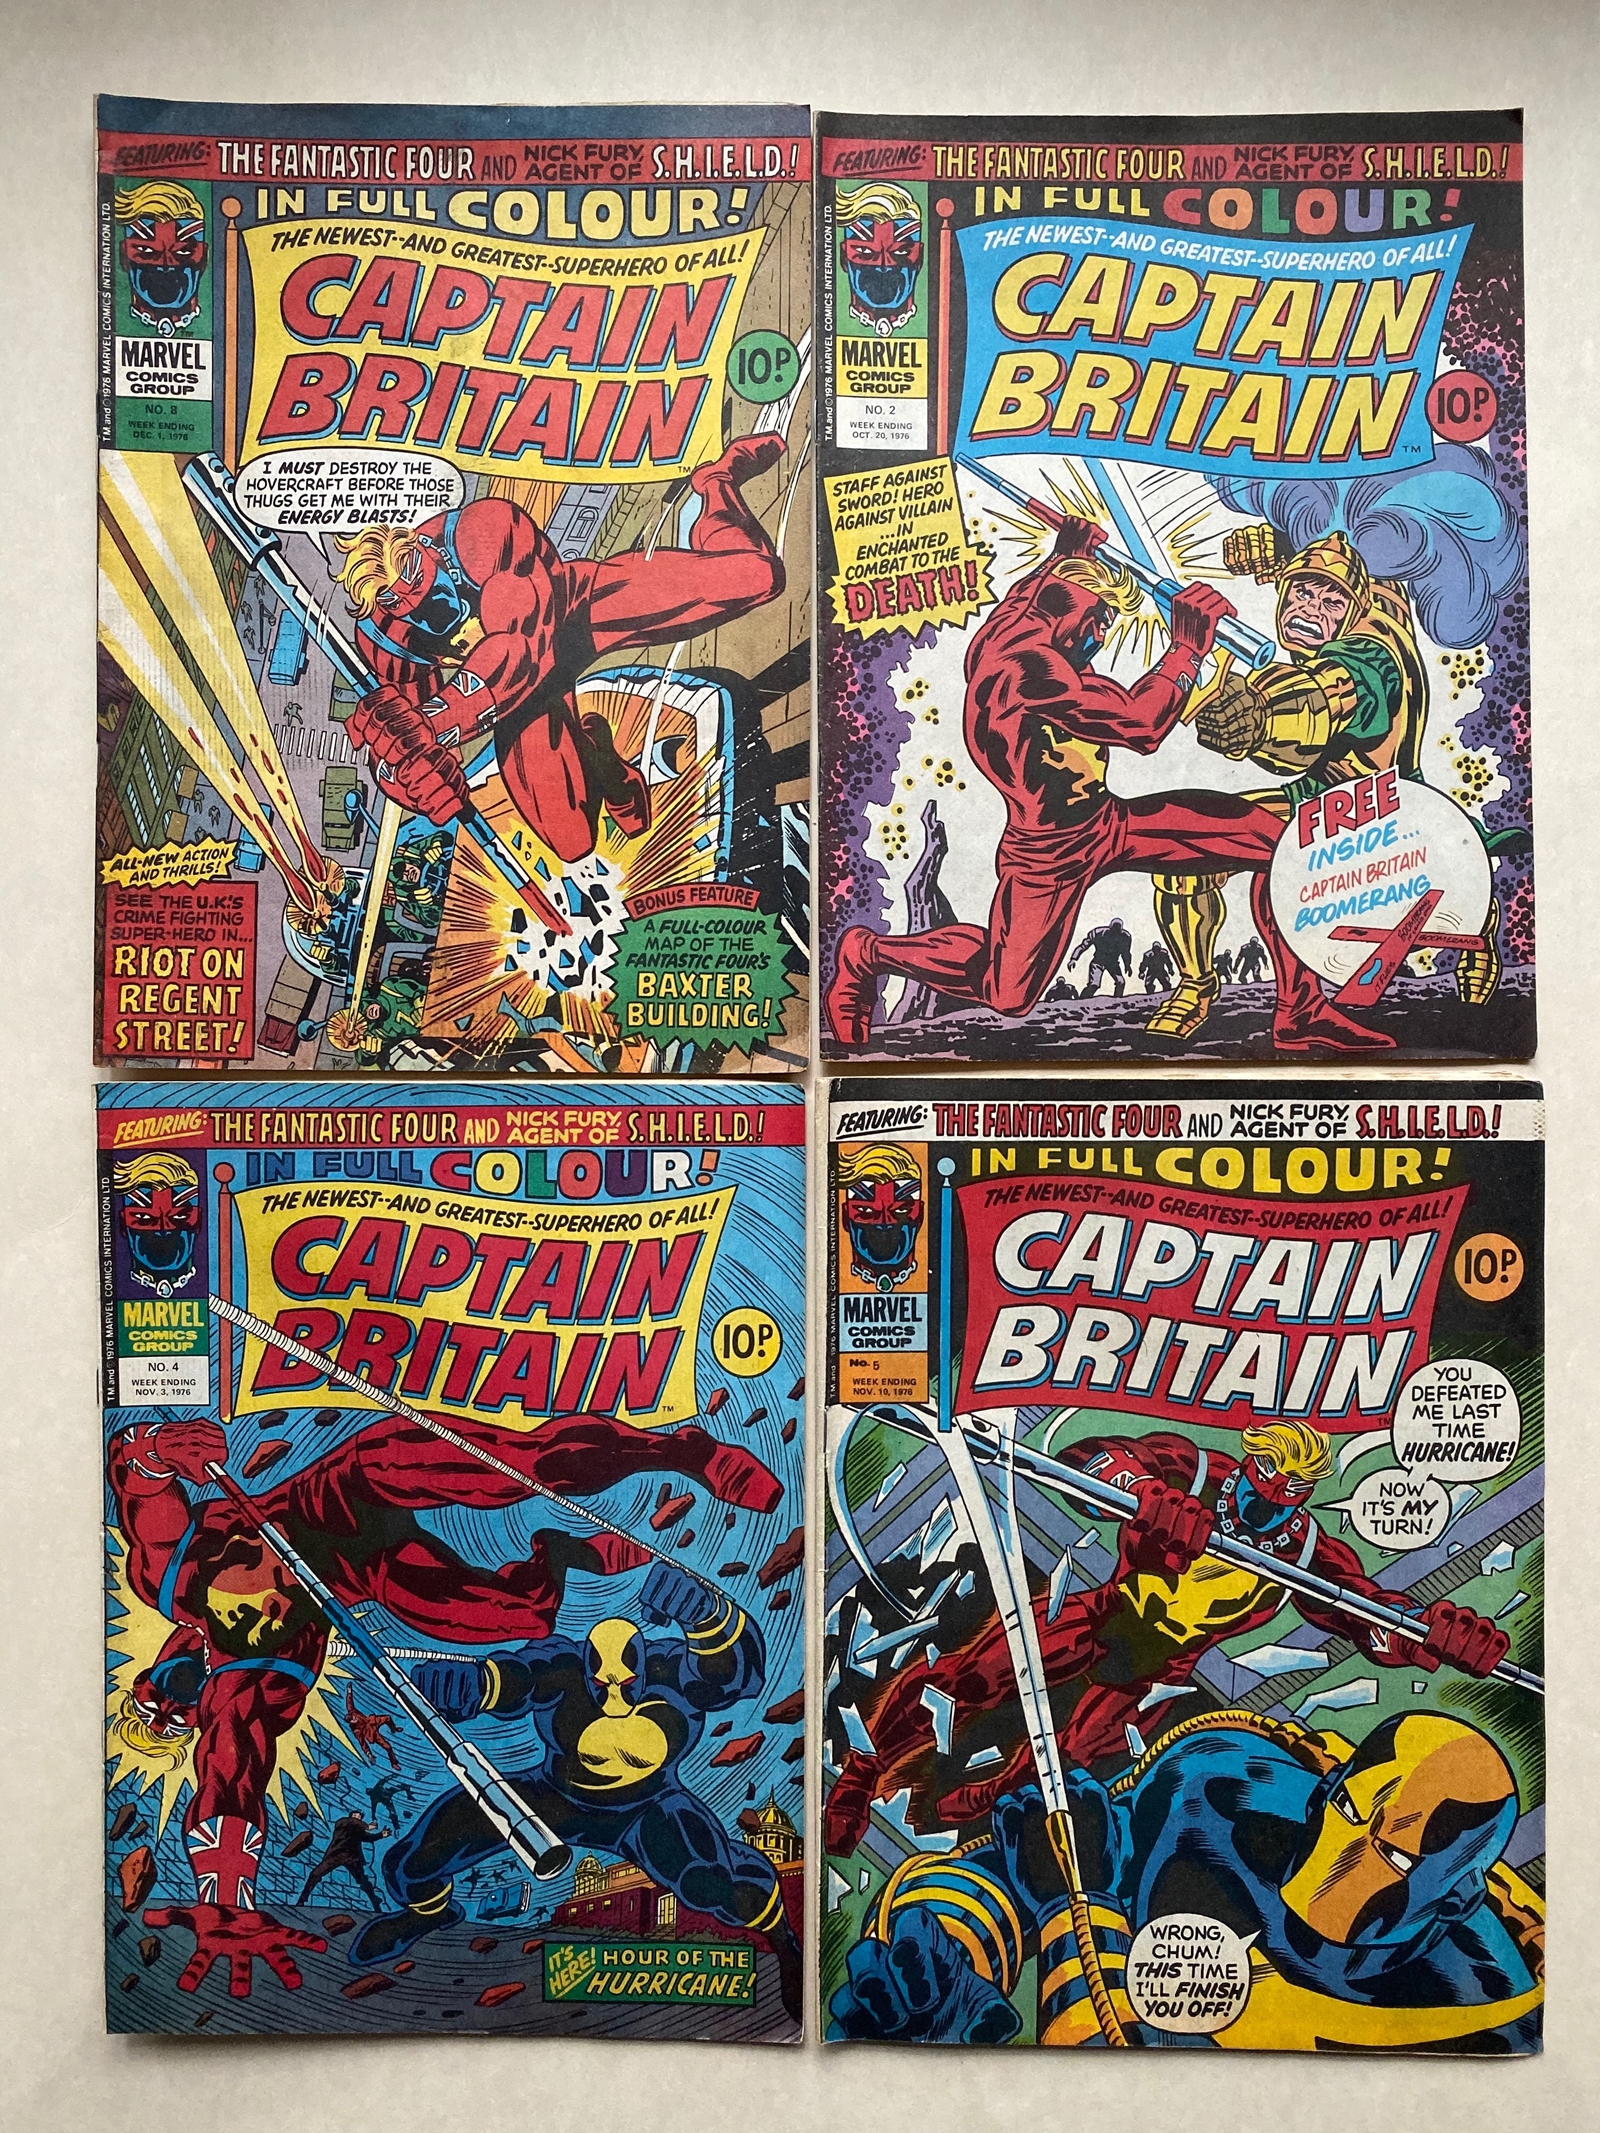 CAPTAIN BRITAIN (6 in Lot) - (1976 - BRITISH MARVEL) - GD/VG (Pence Copy) - Run includes #2, 4, 5,